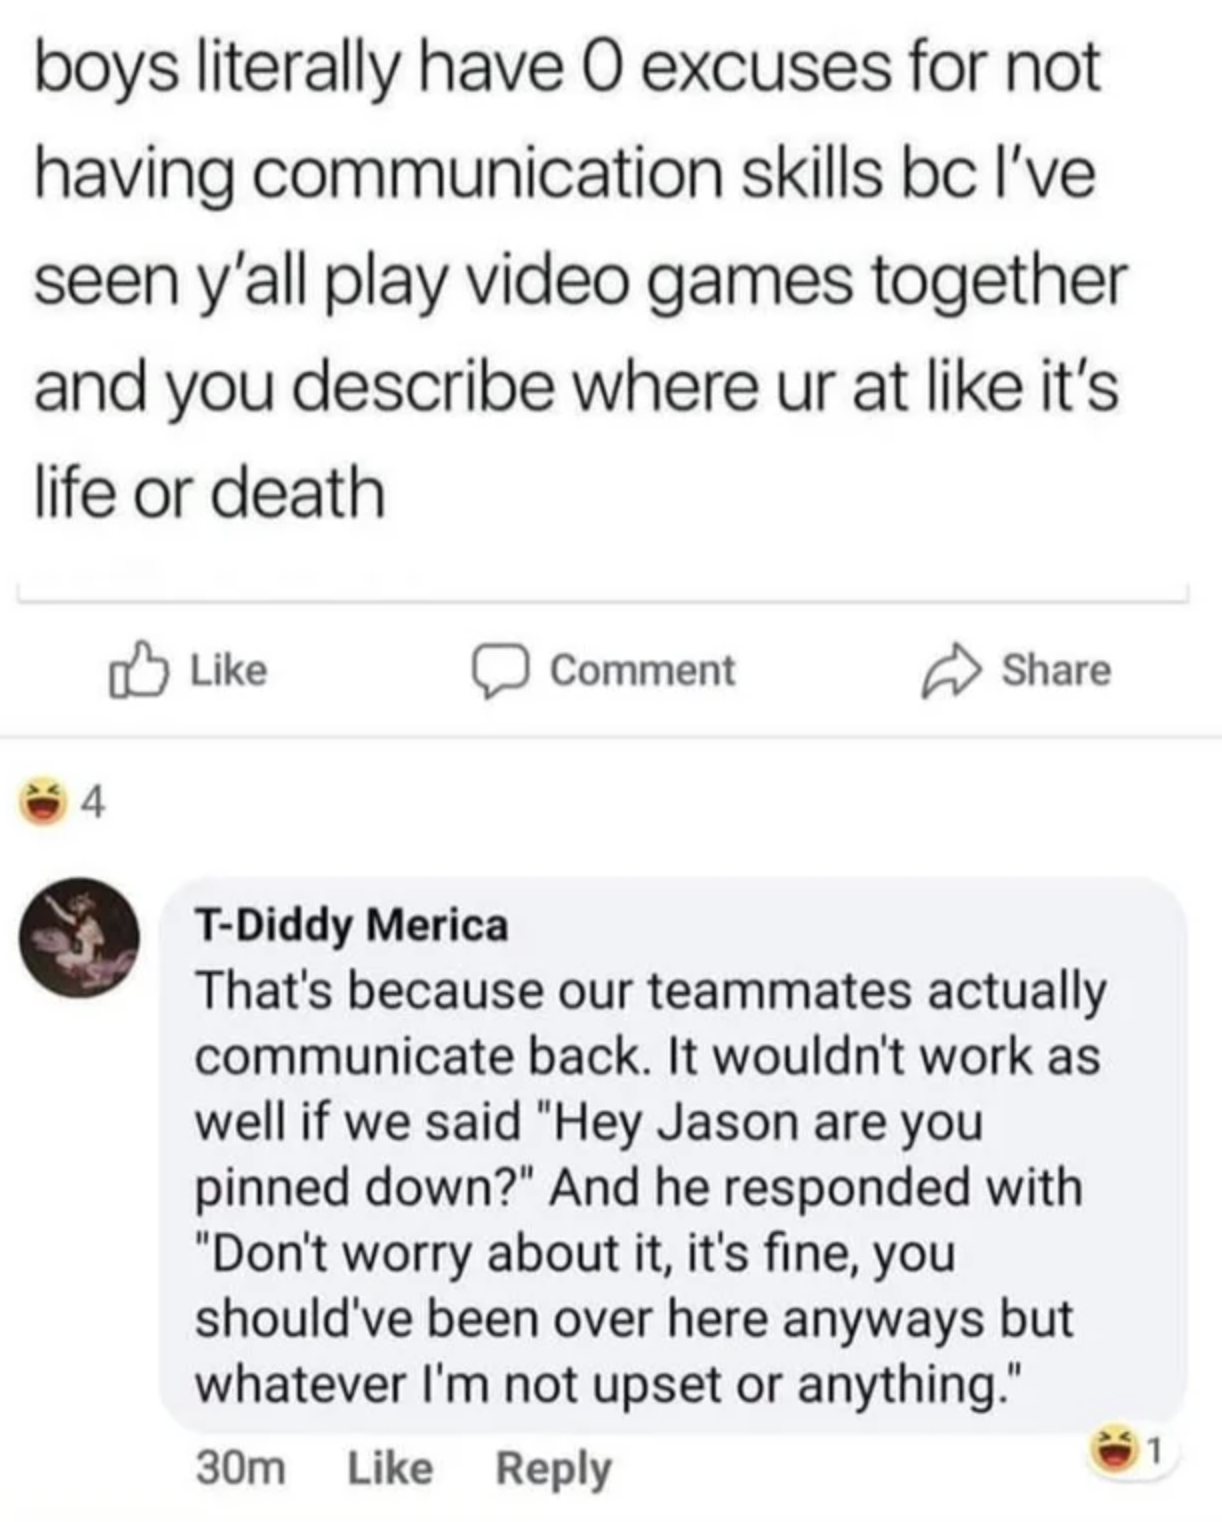 boys have 0 excuse for not communicating - boys literally have 0 excuses for not having communication skills bc I've seen y'all play video games together and you describe where ur at it's life or death Comment 4 TDiddy Merica That's because our teammates 